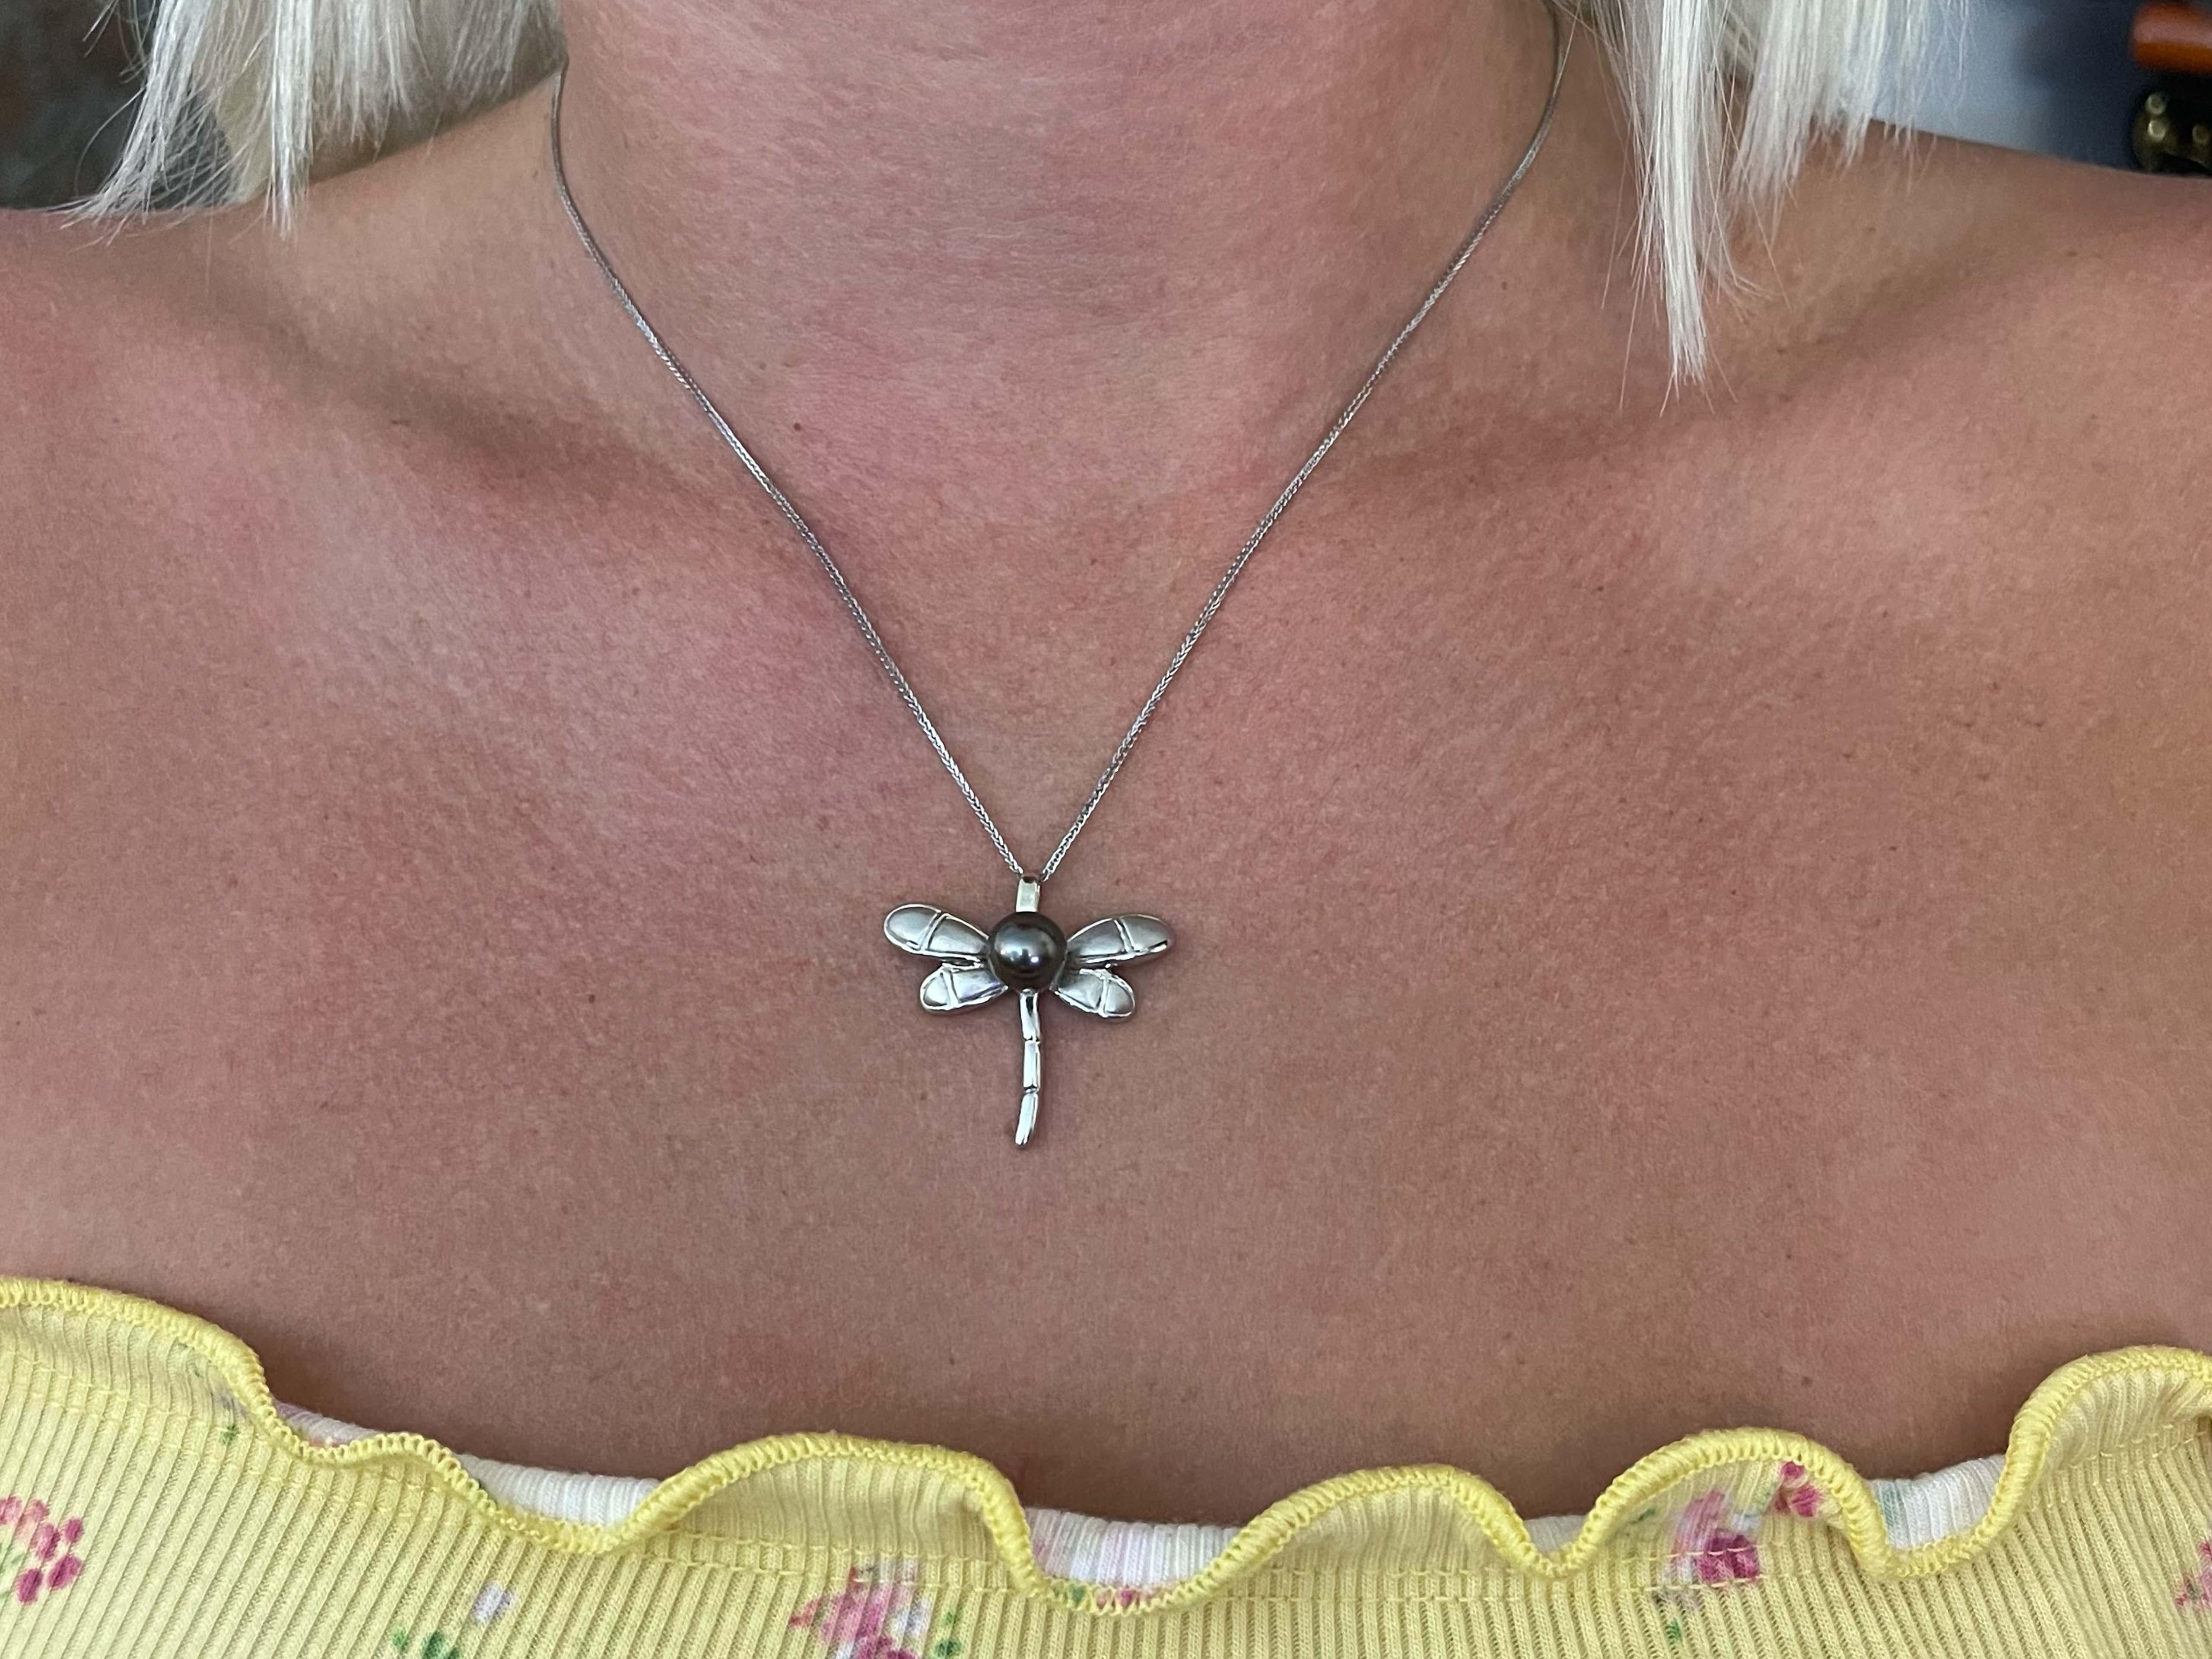 This pendant features a dragonfly with a Tahitian connecting the wings. The pearl measures 8 mm in diameter and the pendant drops 1